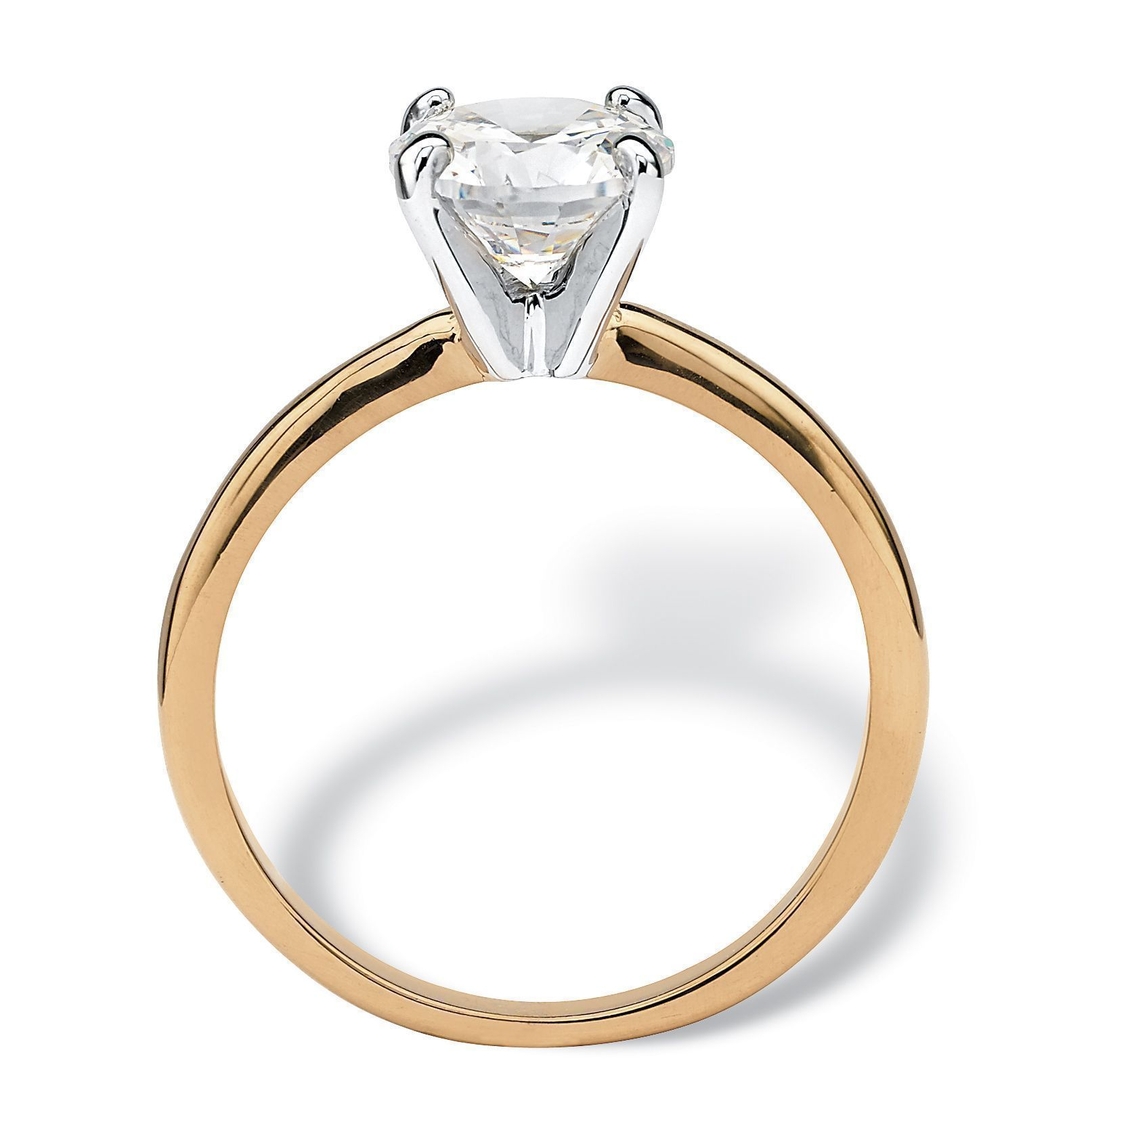 2.00 Carat Round Cubic Zirconia Solitaire Engagement Ring in 18k Gold-Plated - Image 2 of 5